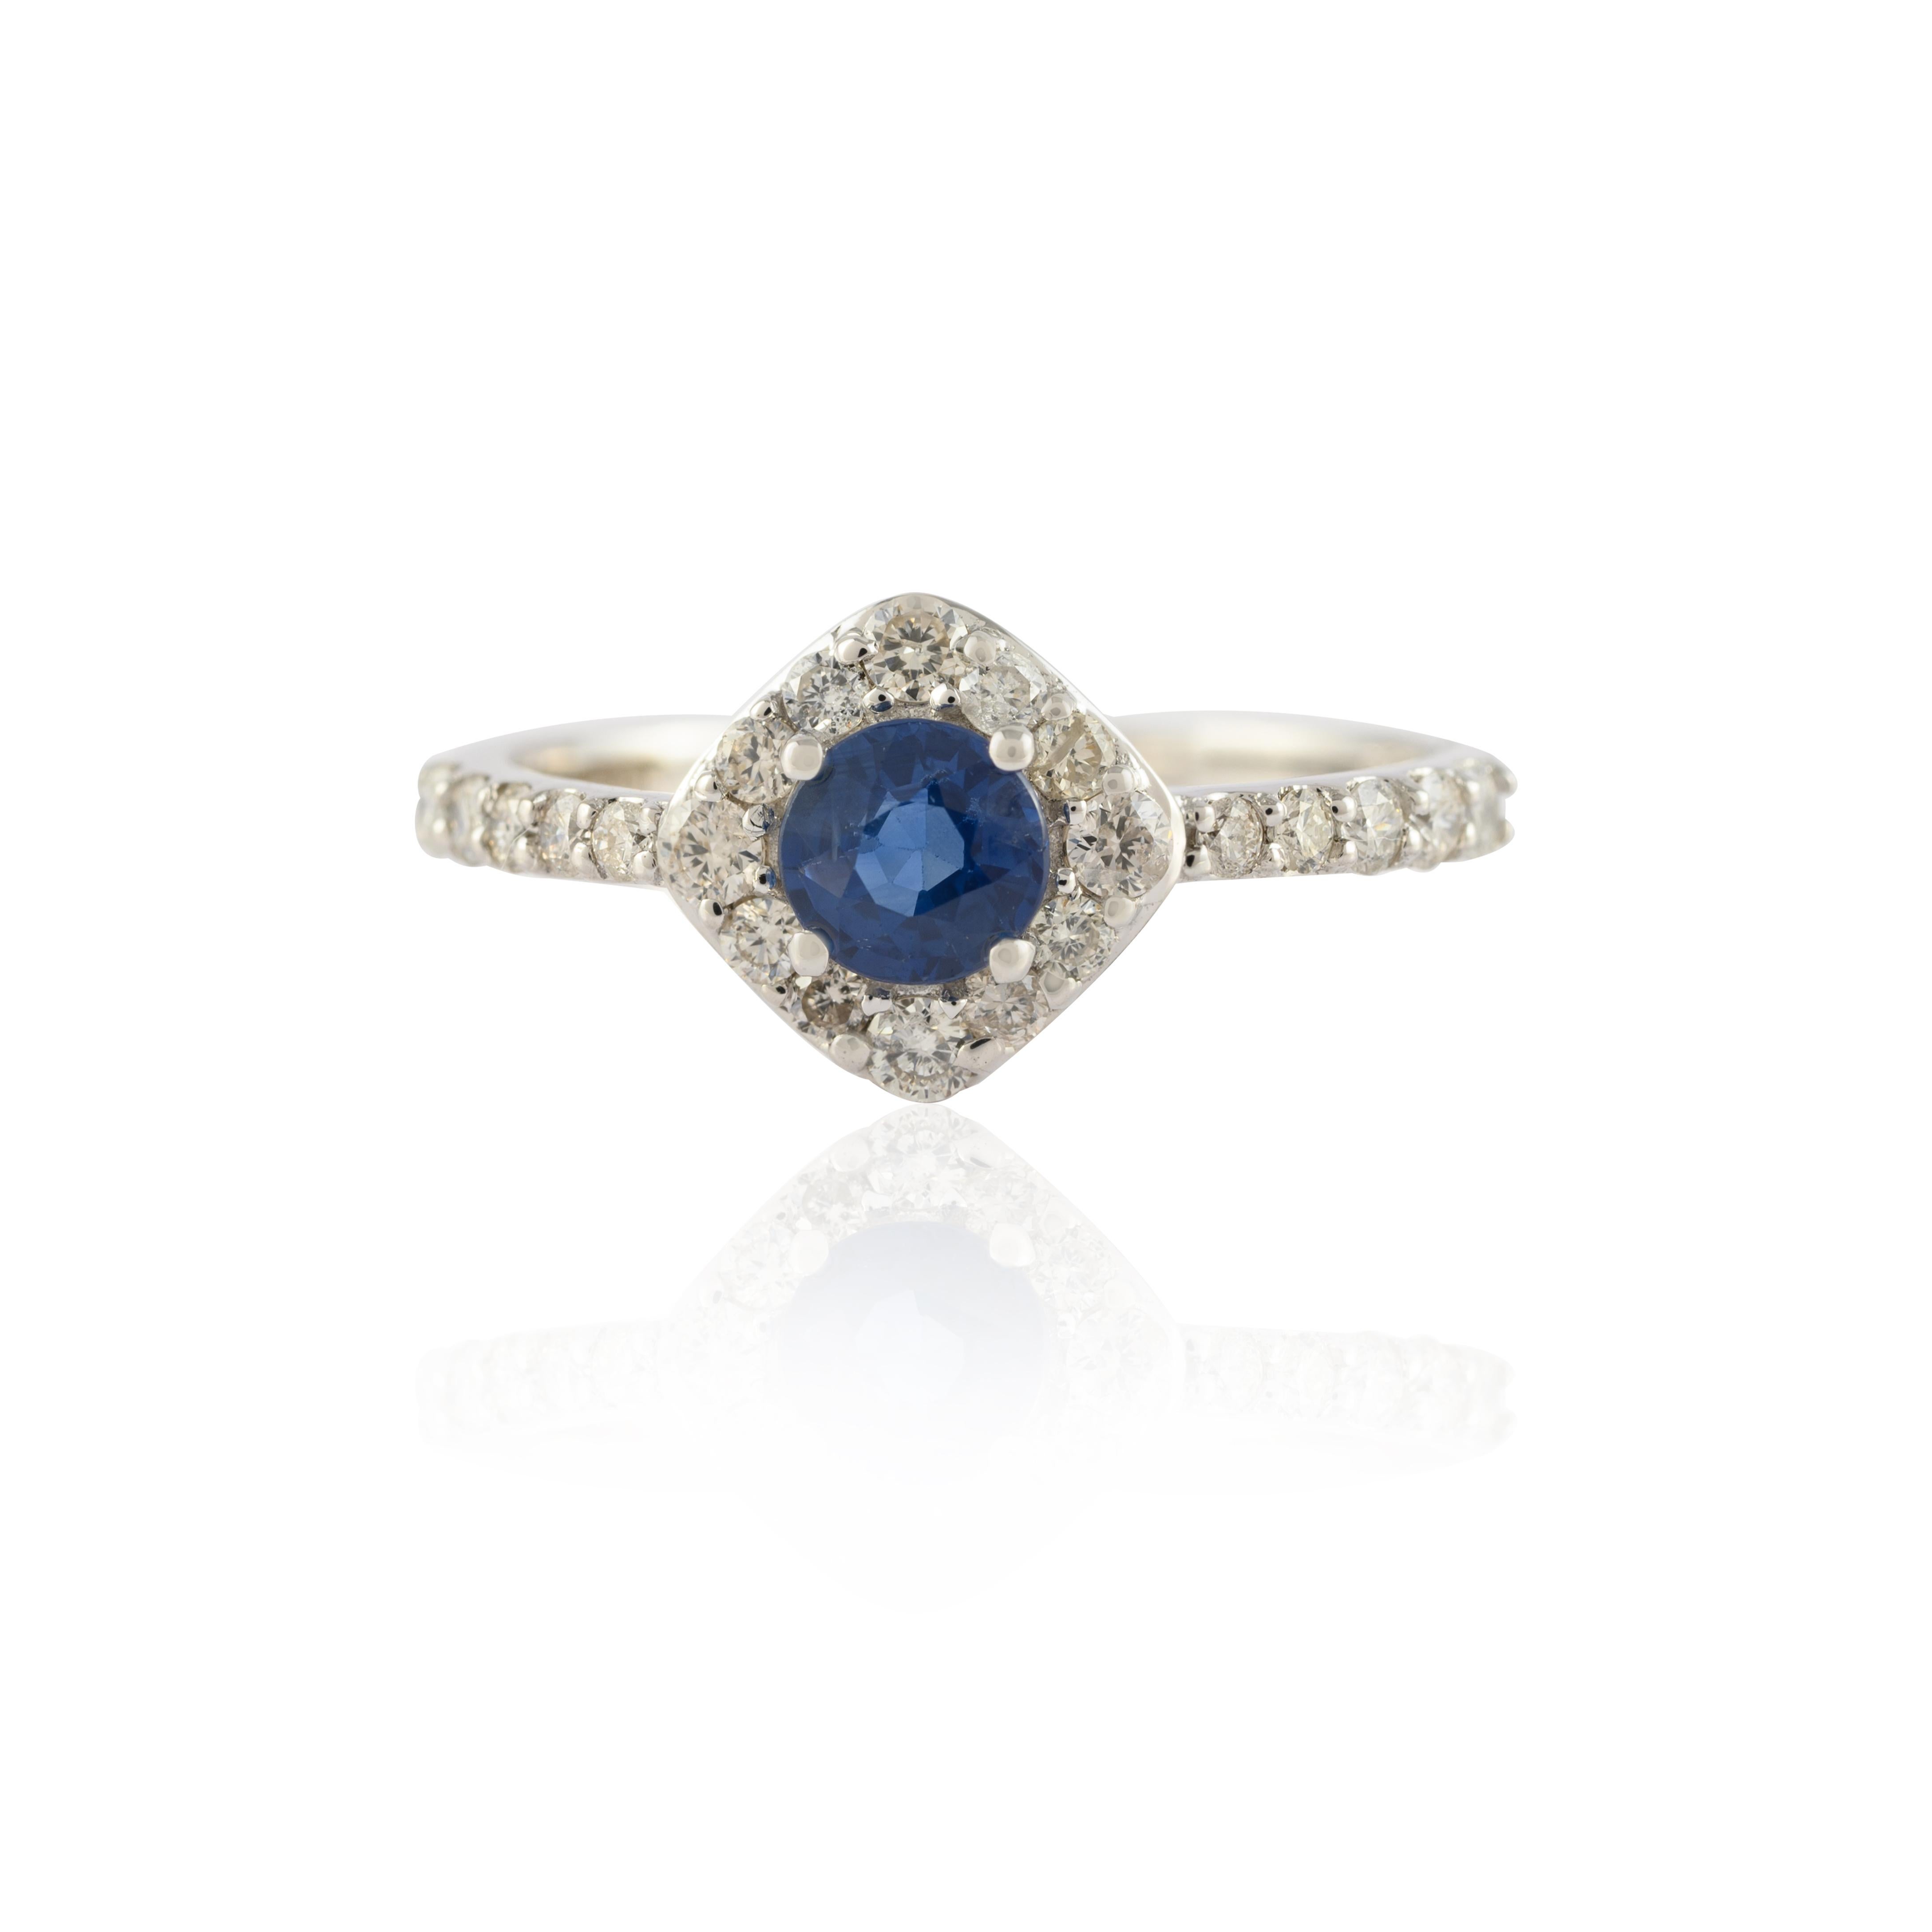 For Sale:  Royal Blue Sapphire with Halo Diamond Ring Crafted in Solid 14k White Gold 3